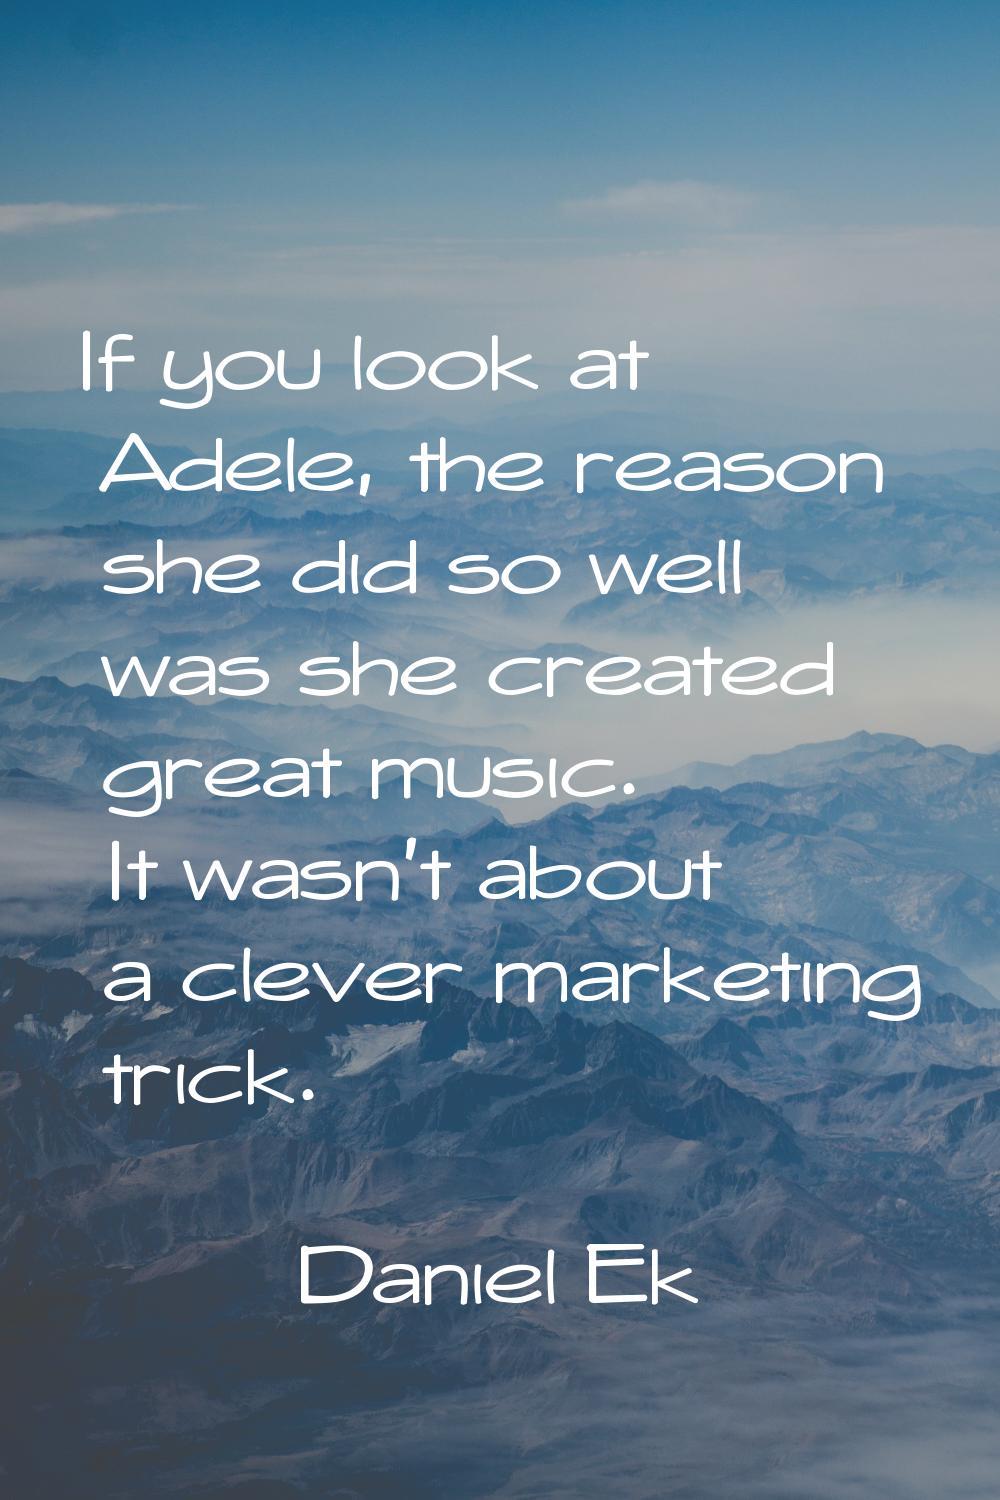 If you look at Adele, the reason she did so well was she created great music. It wasn't about a cle